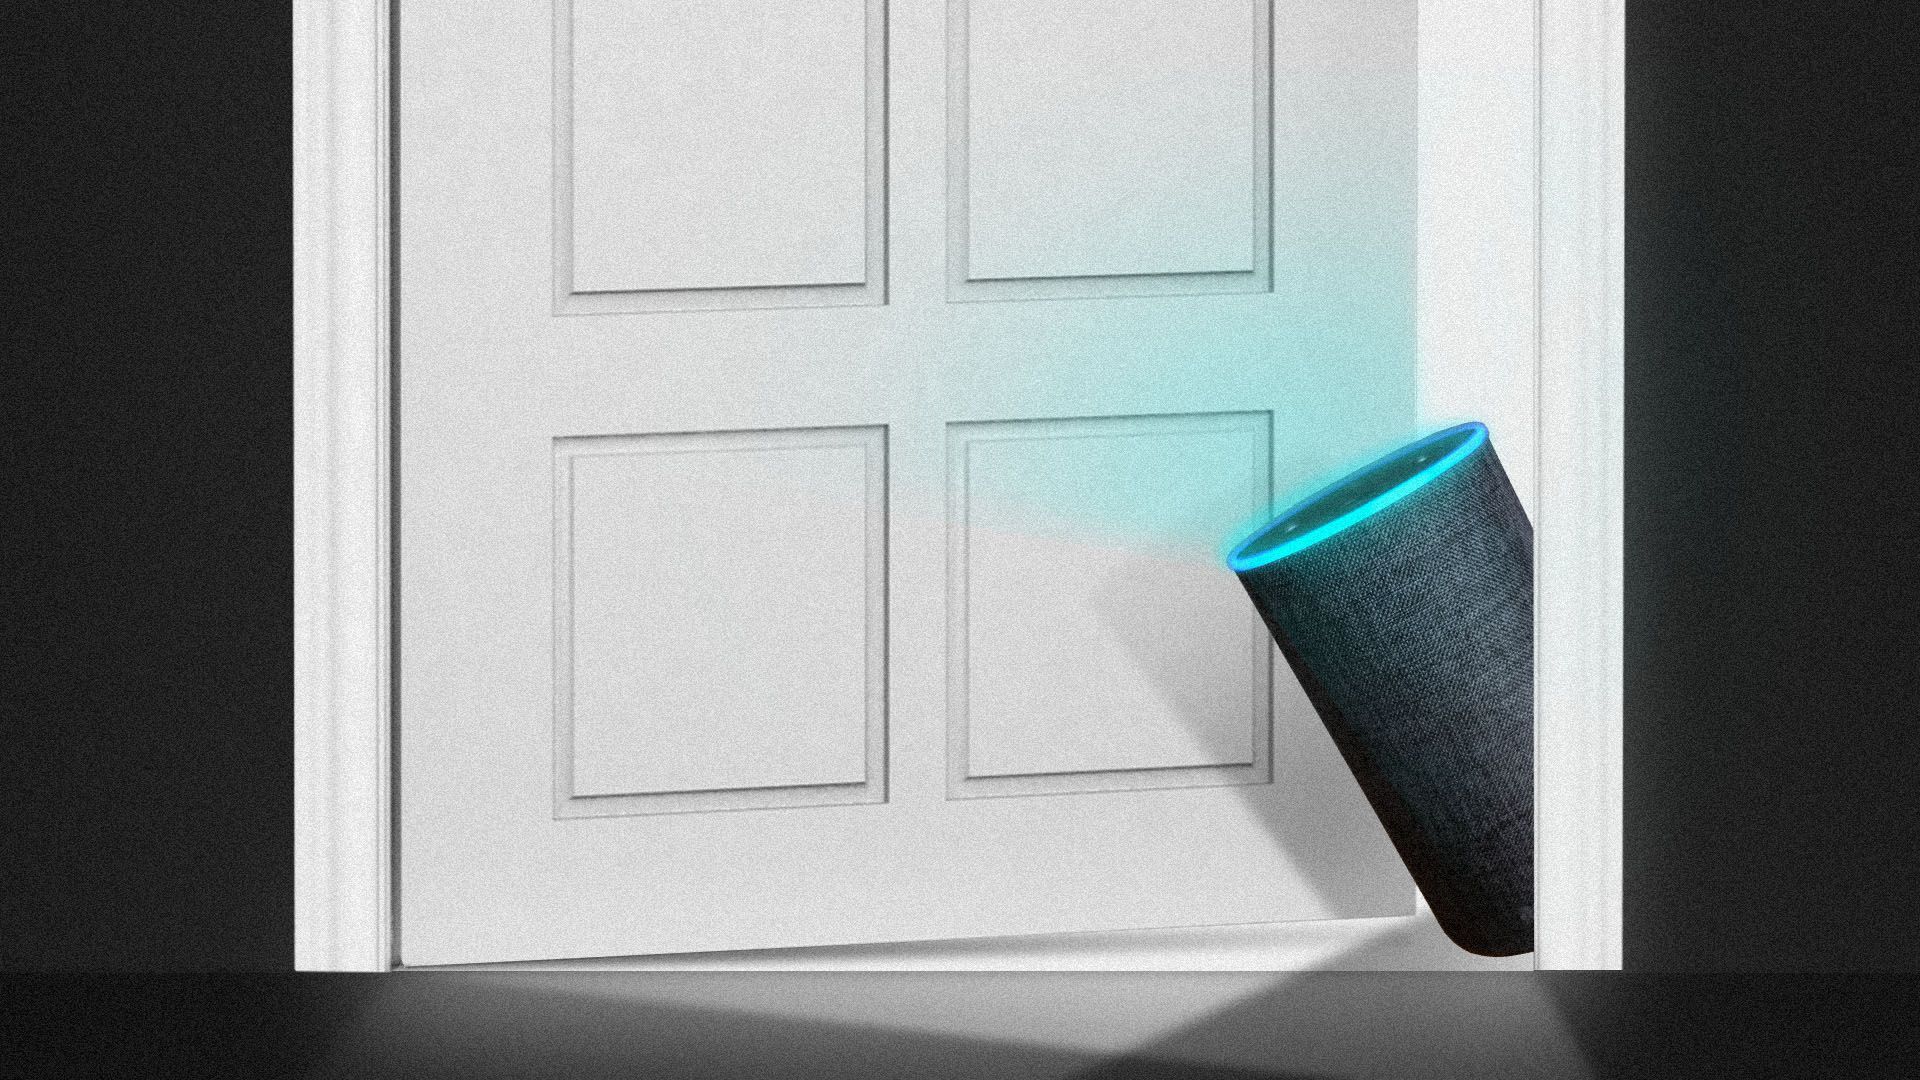 Illustration of an Amazon Alexa peaking out from behind a door